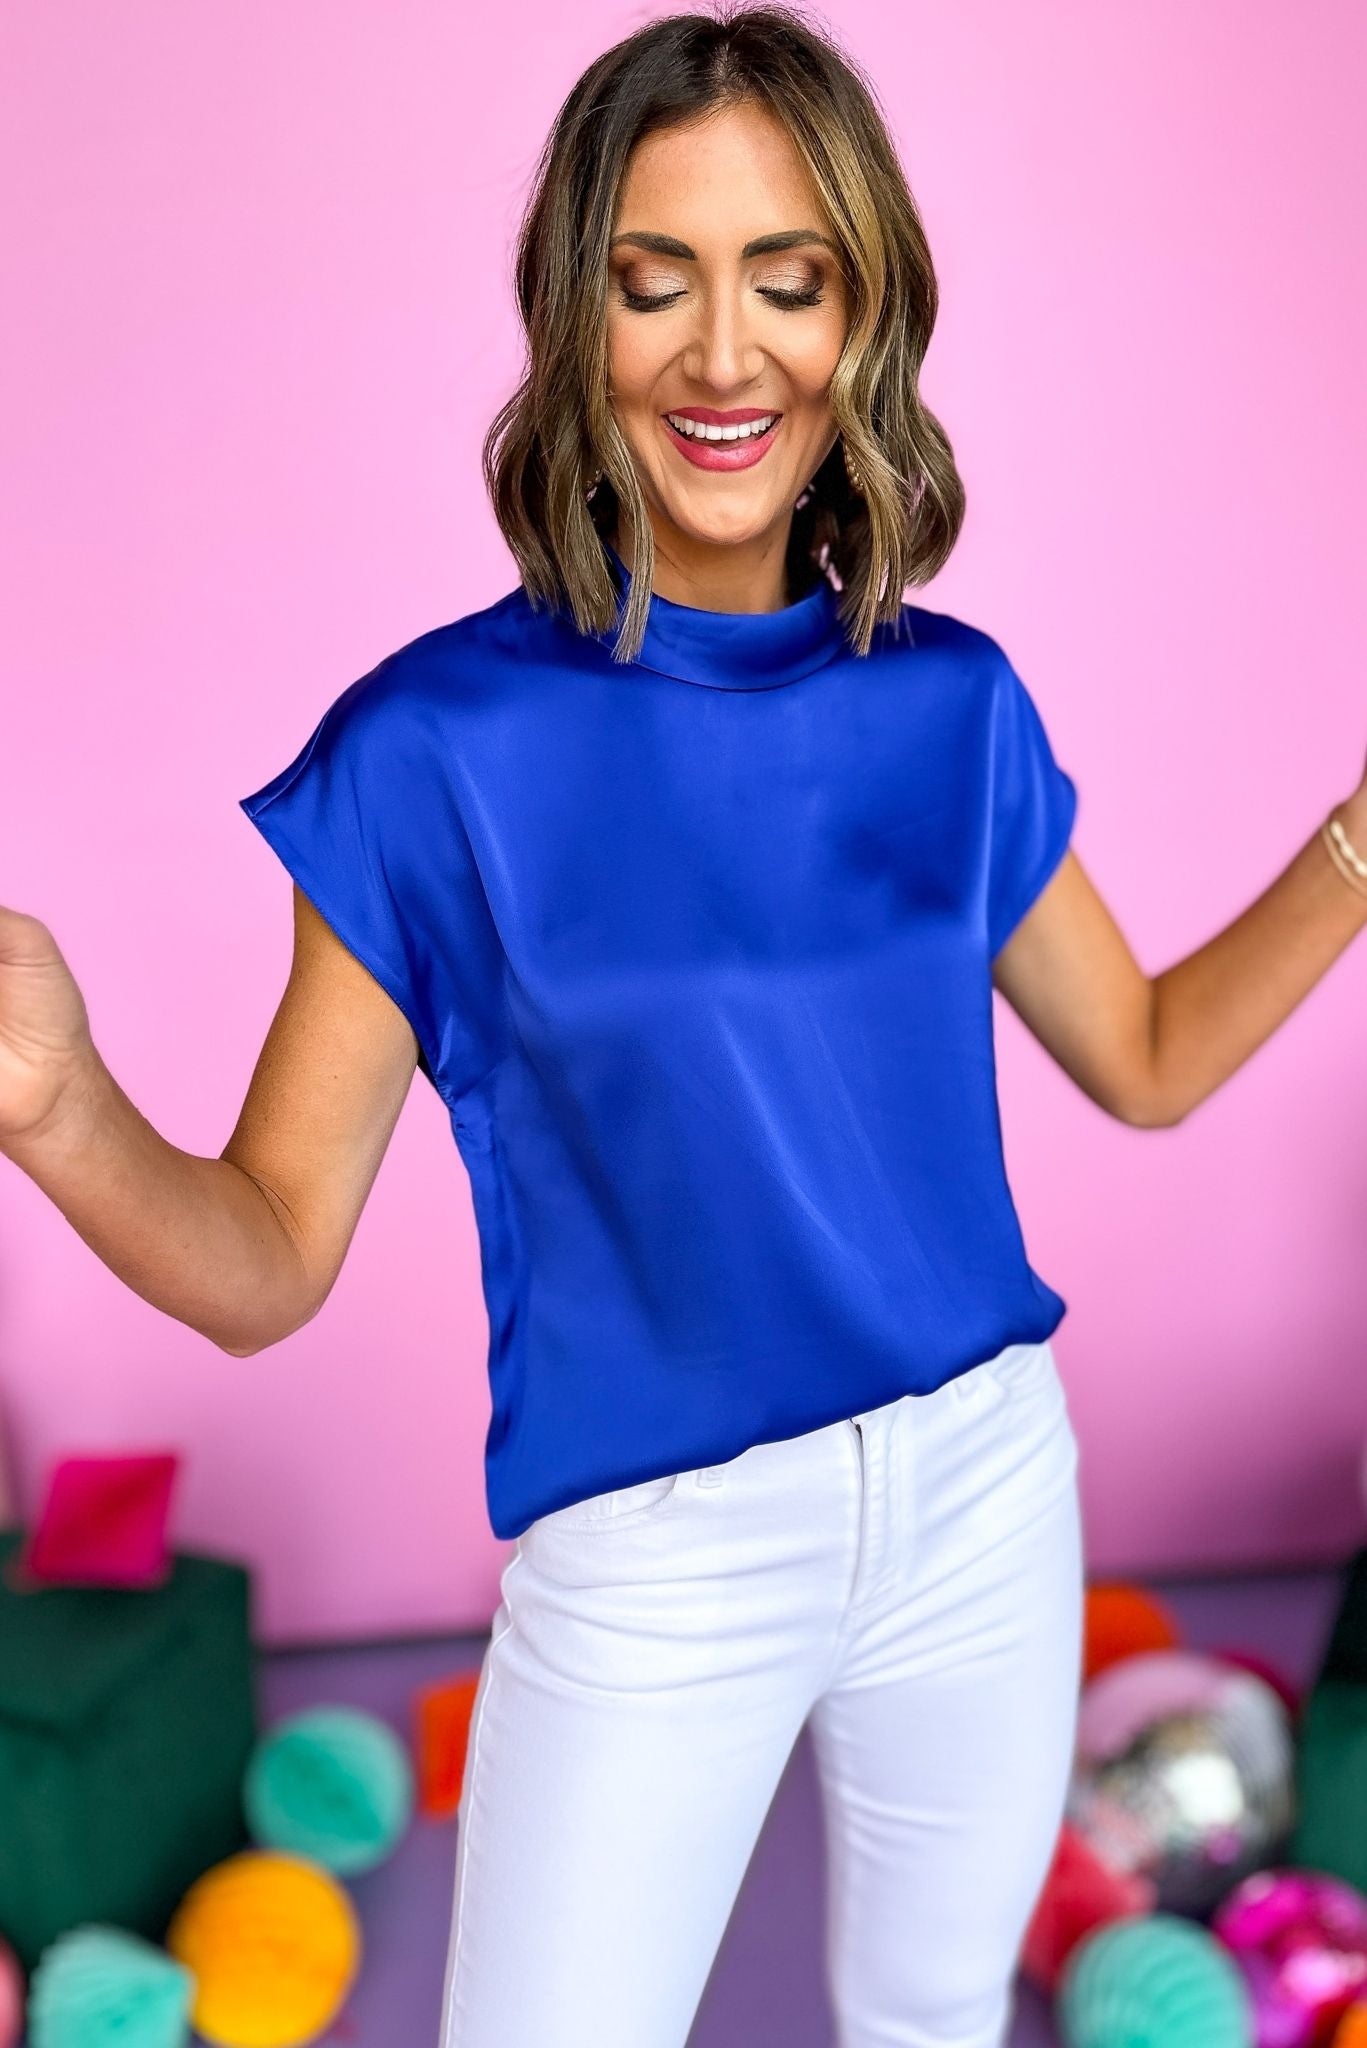 Load image into Gallery viewer, Blue Fold Down Collar Short Sleeve Satin Top, satin top, short sleeve, office look, must have, new arrival, shop style your senses by mallory fitzsimmons
